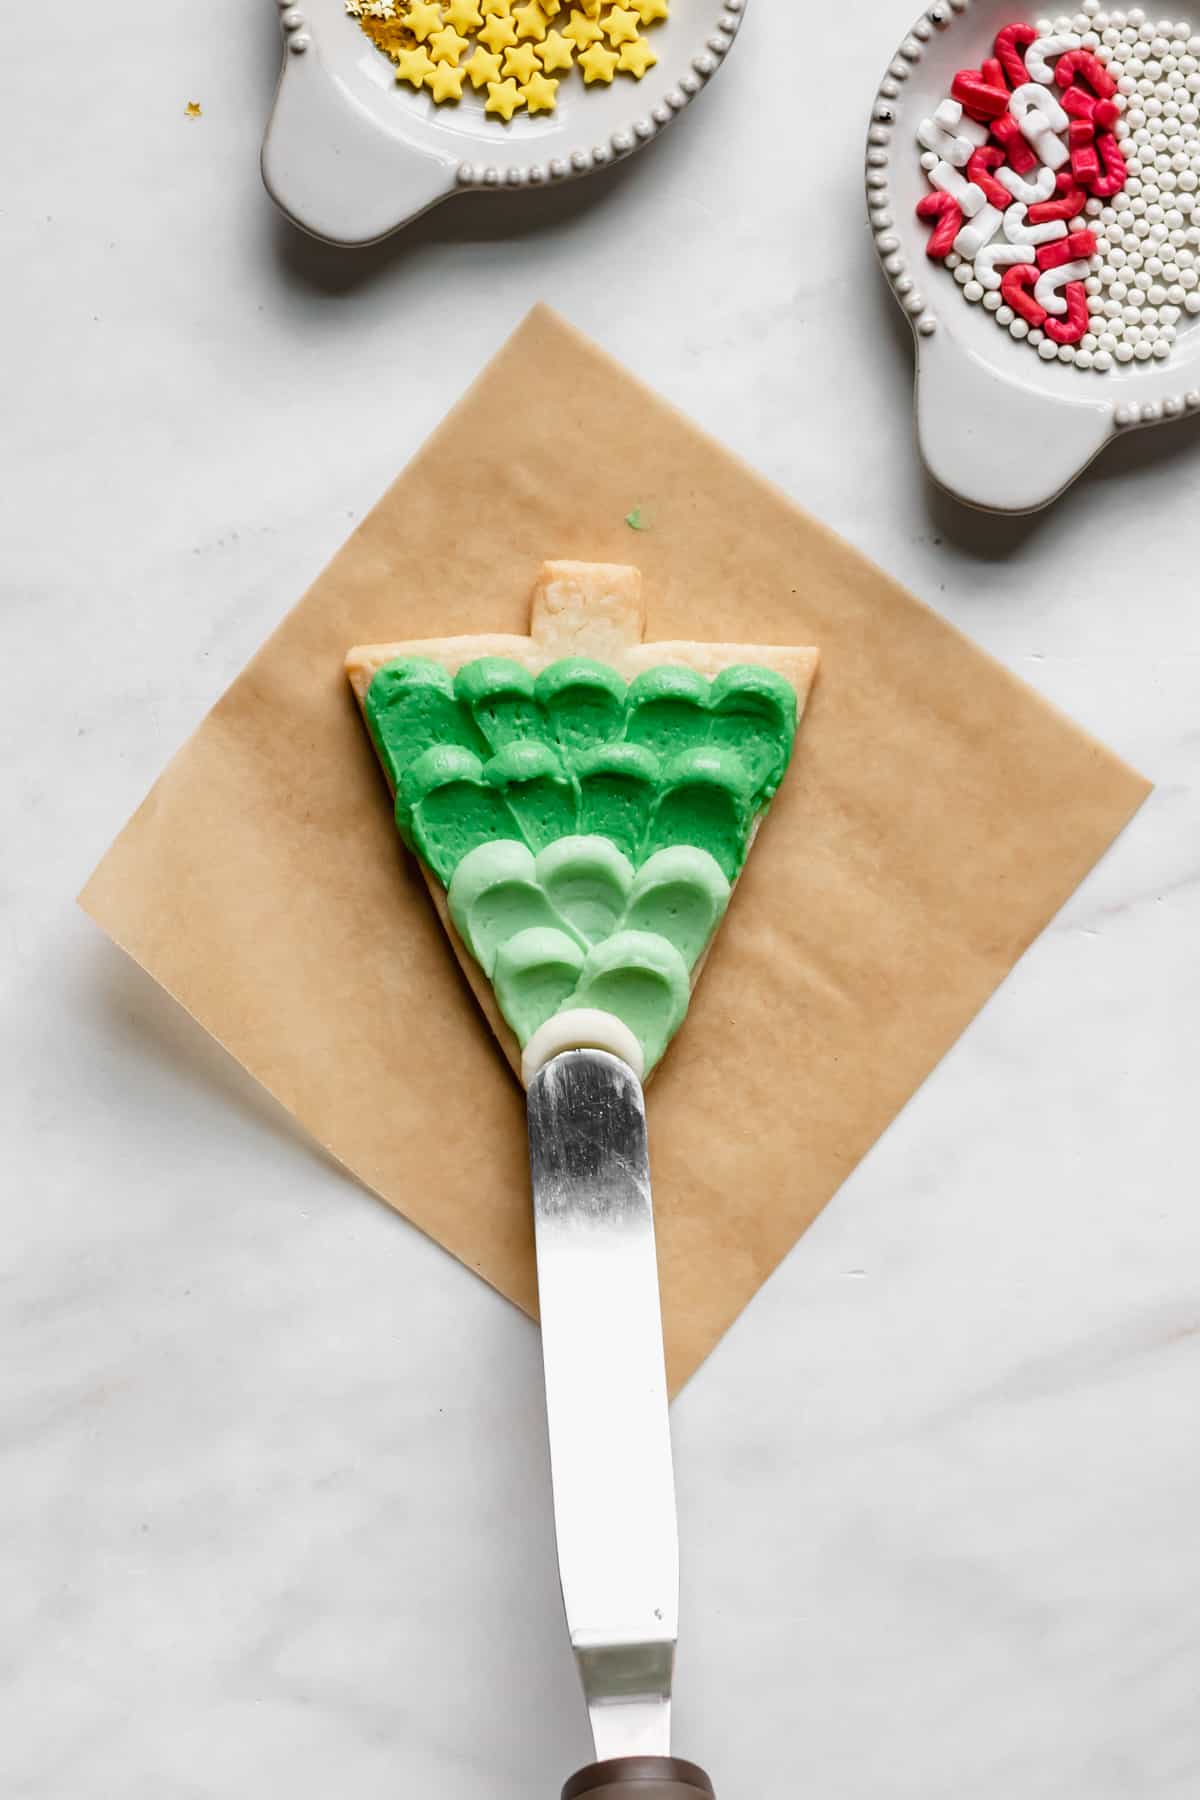 Offset spatula making the design in the icing.